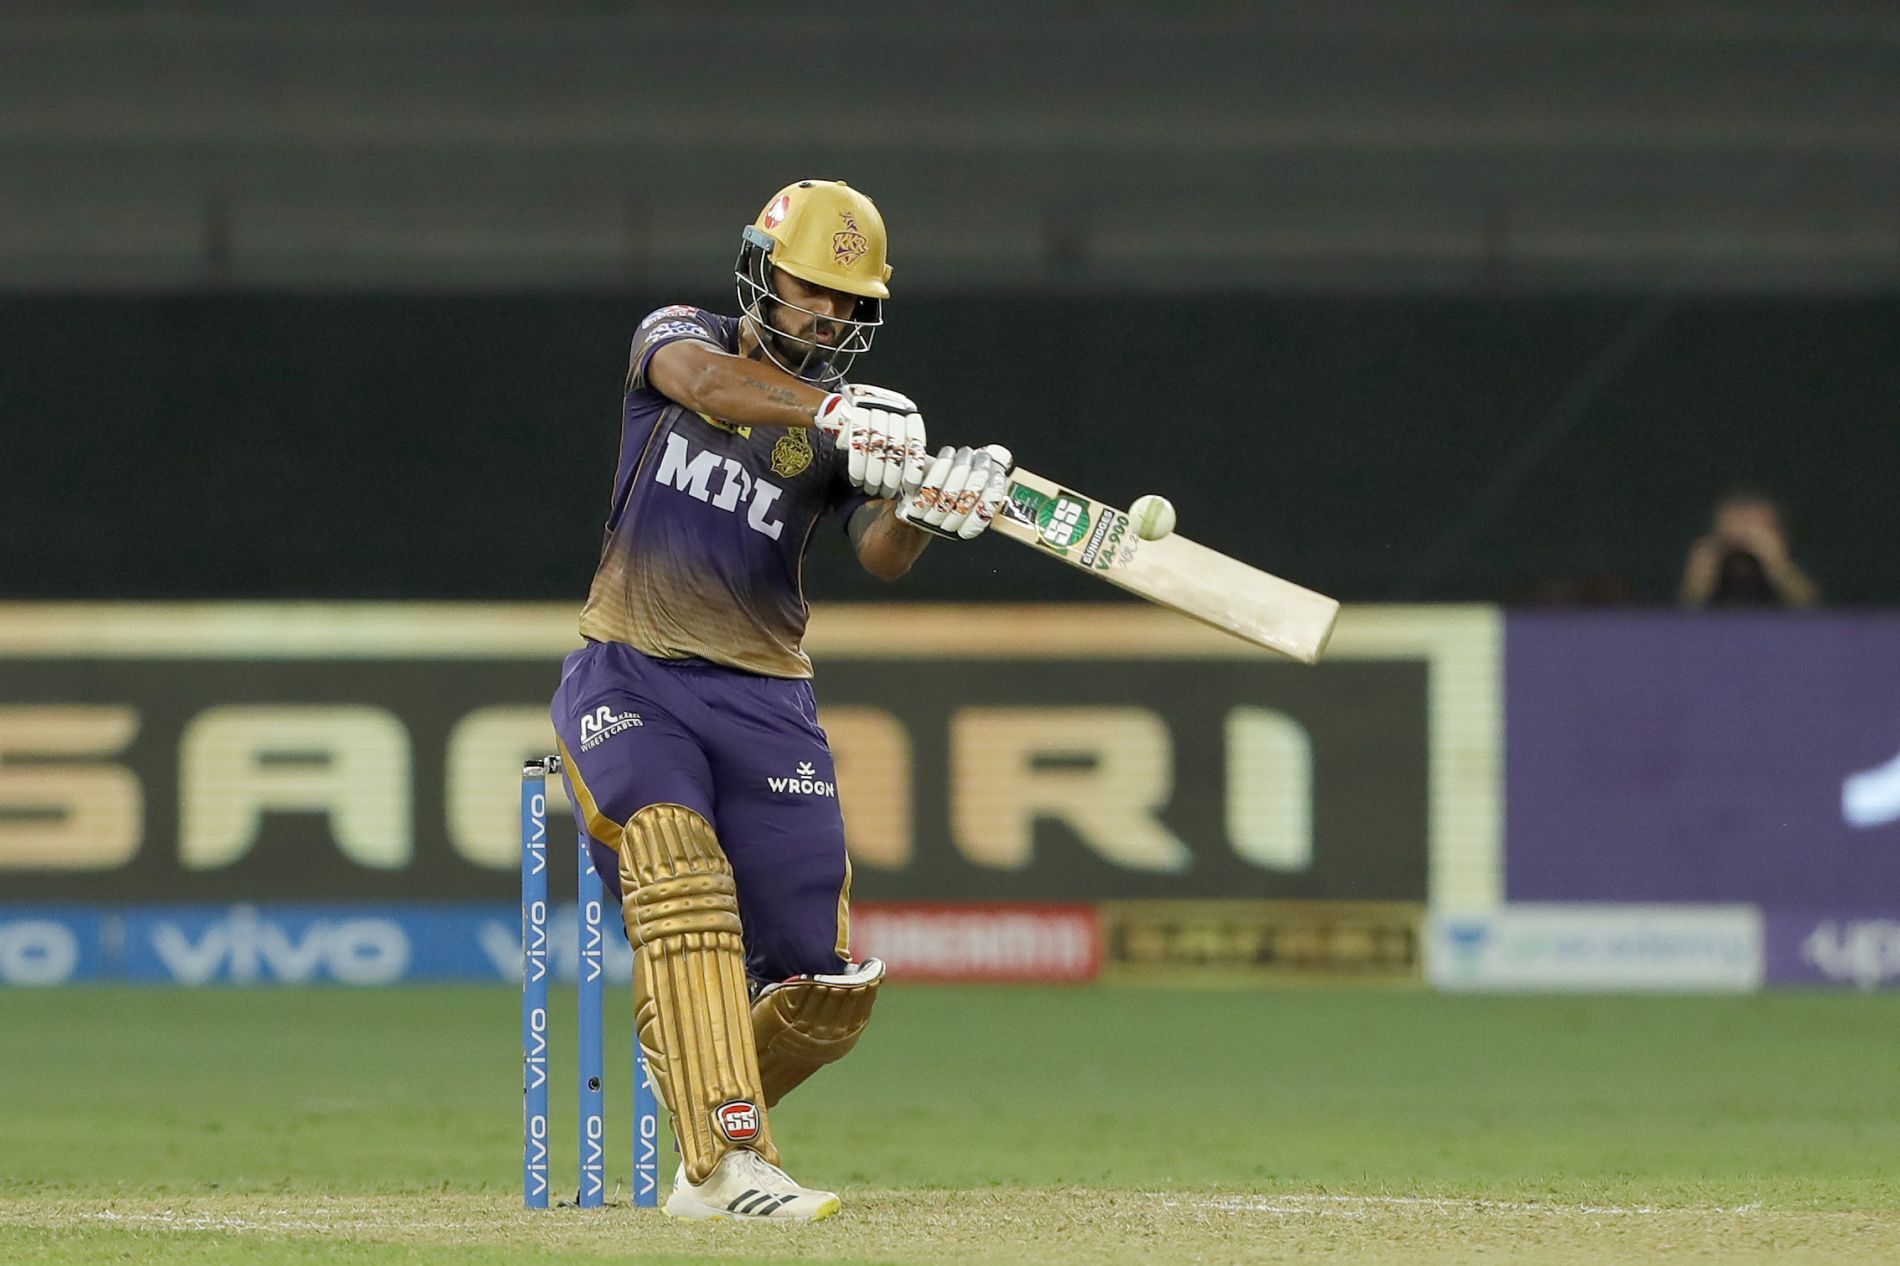 Nitish Rana was reacquired by KKR at the IPL 2022 Auction [P/C: iplt20.com]